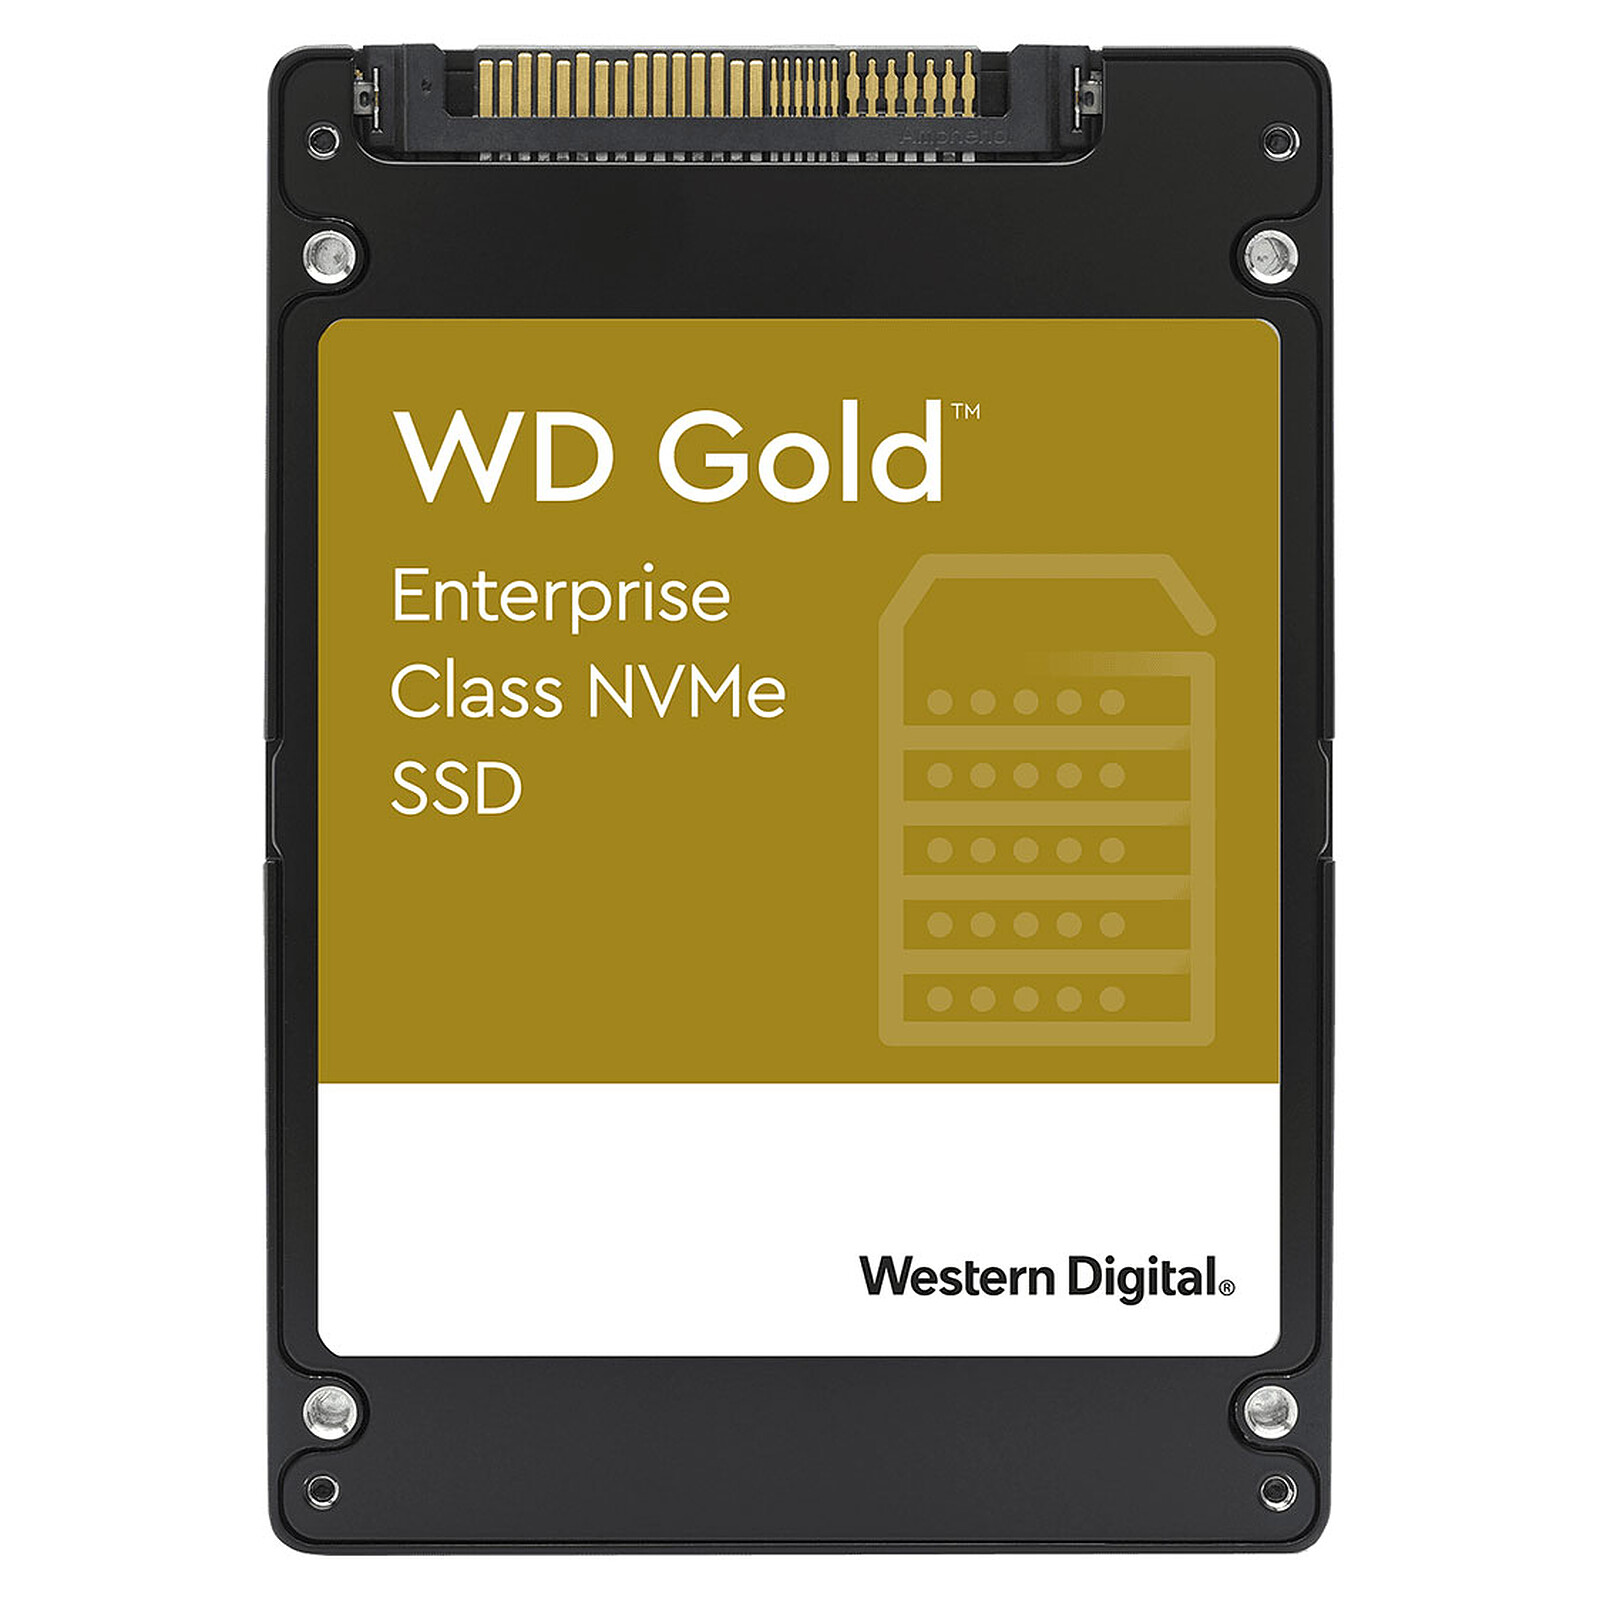 Western Digital SSD NVMe WD Gold 960 Go - Disque SSD - LDLC